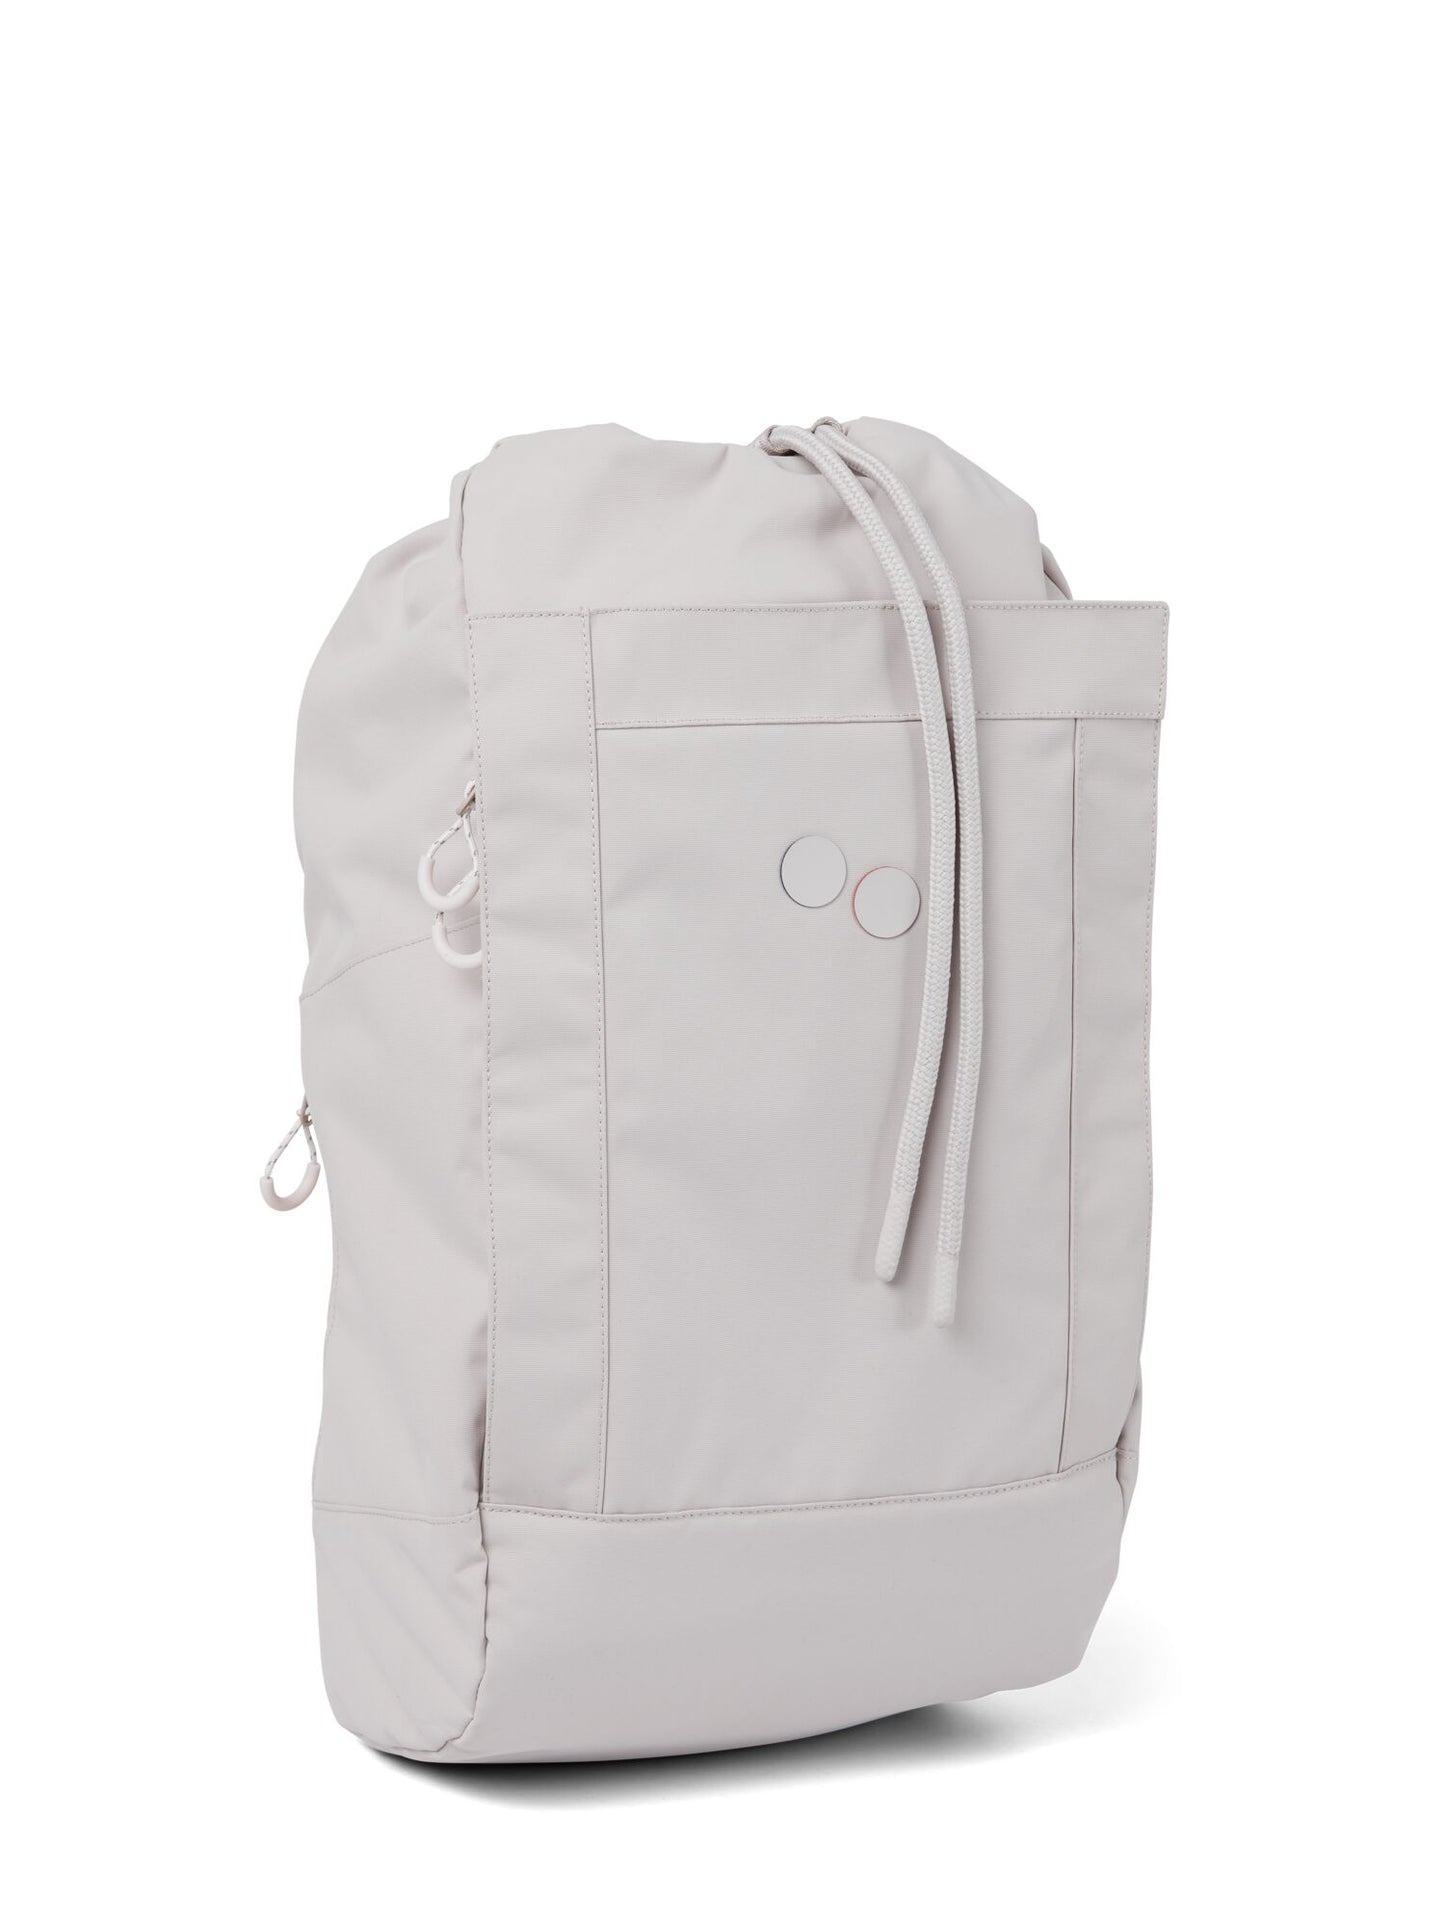 pinqponq-backpack-Kalm-Cliff-Beige-front